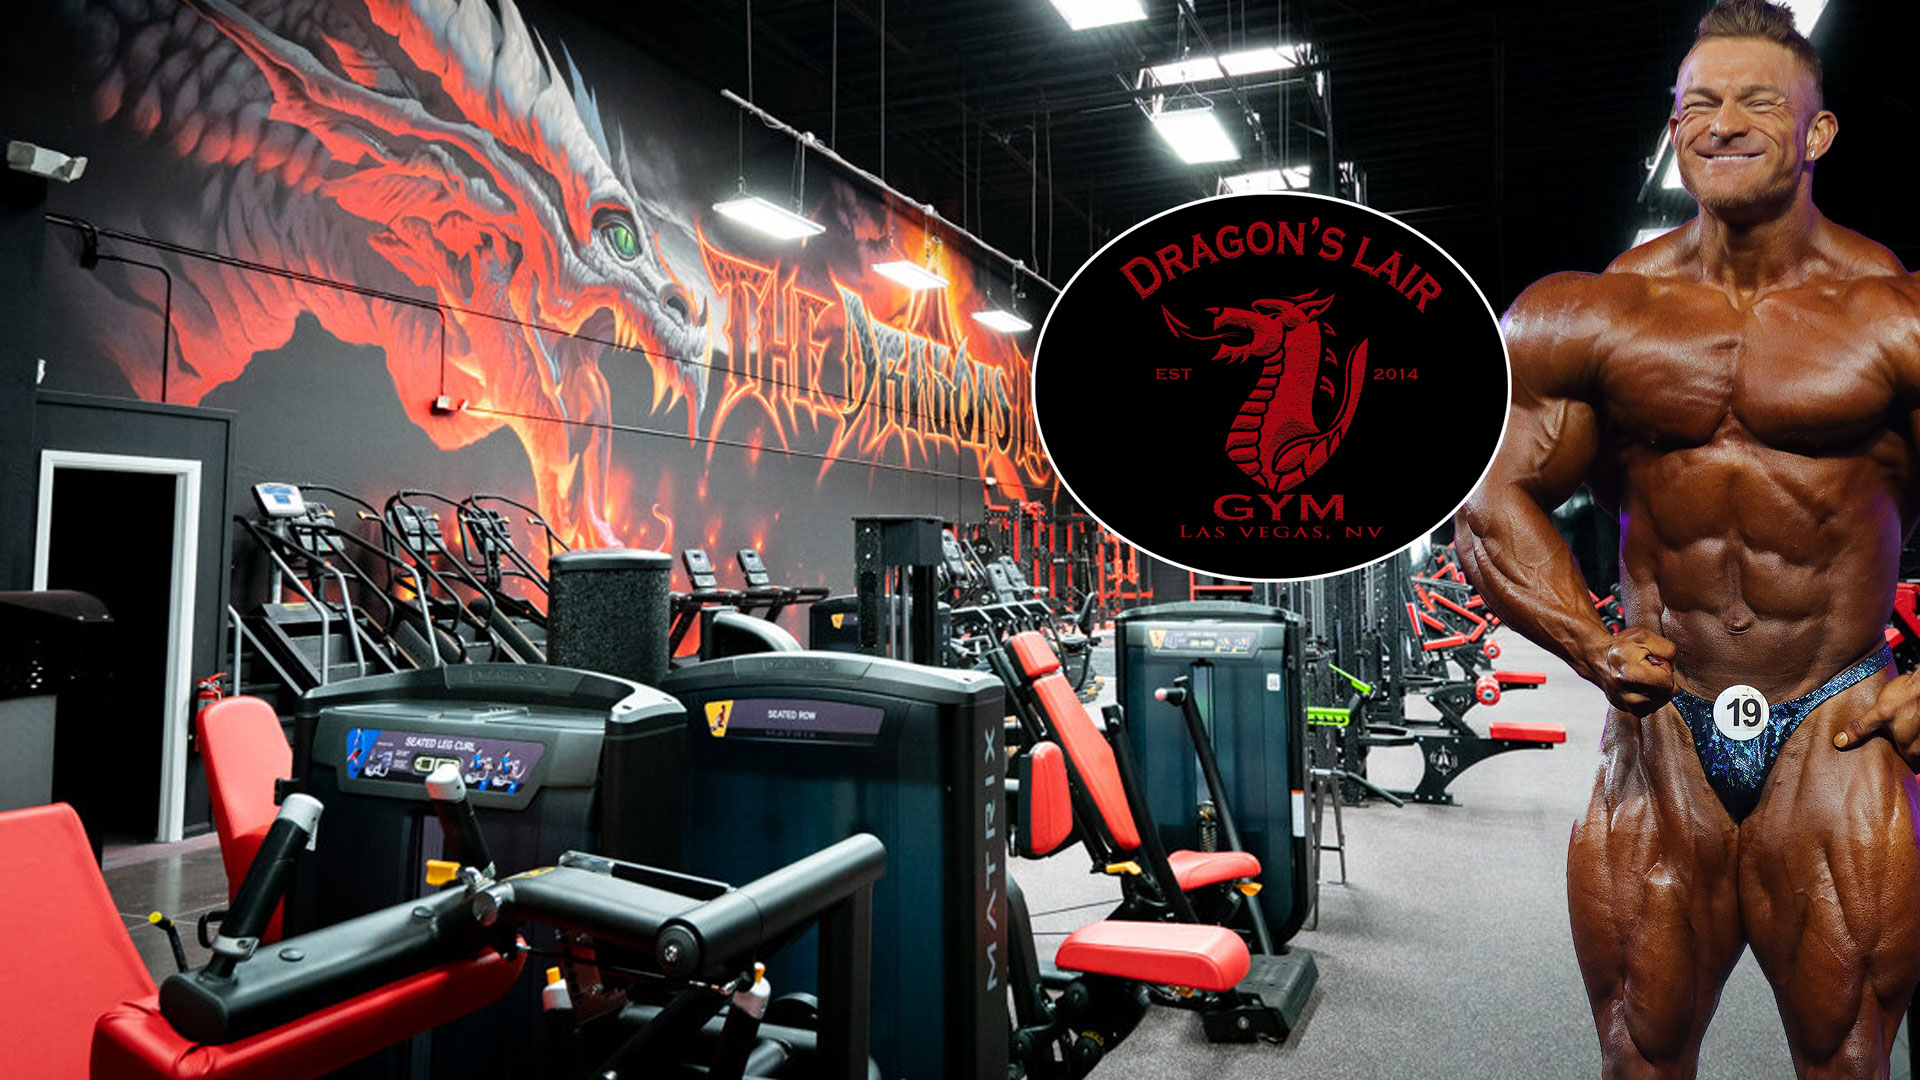 The Dragon's Lair Gym opening - Footage by Milos Sarcev